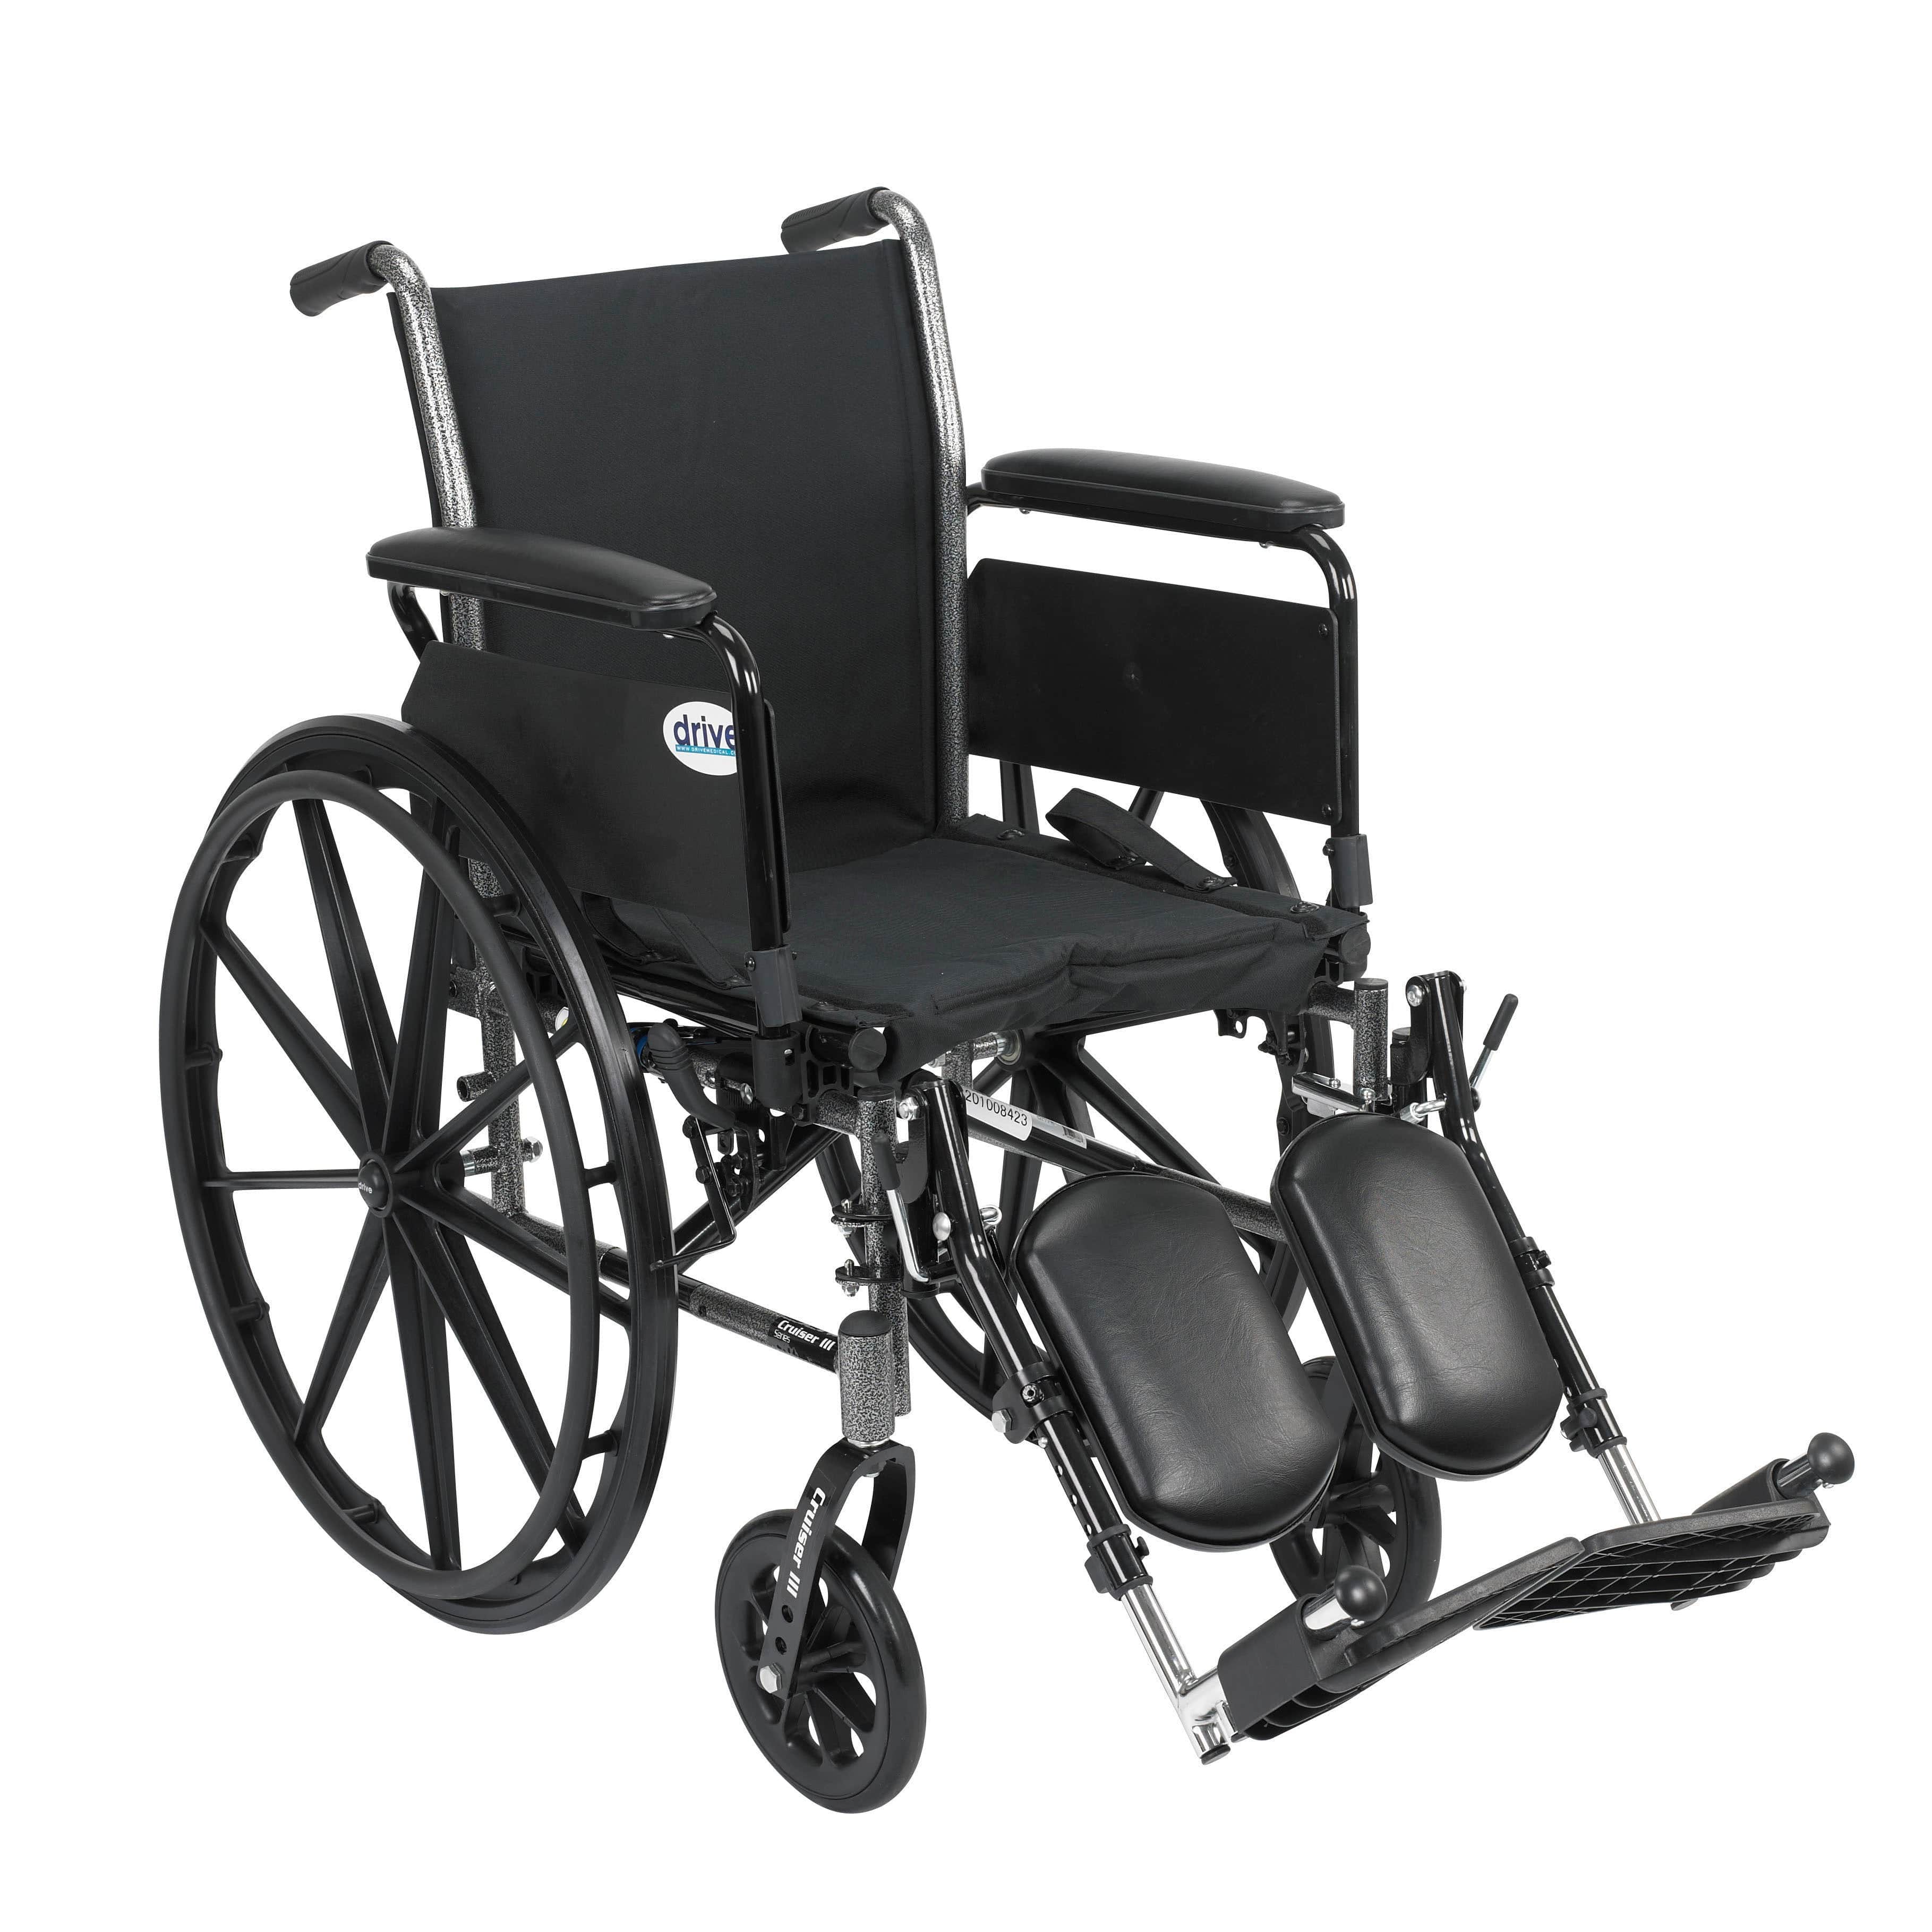 Drive Medical Wheelchairs Flip Back Removable Full Arms and Elevating Leg Rests / 20" Seat Drive Medical Cruiser III Light Weight Wheelchair with Flip Back Removable Arms